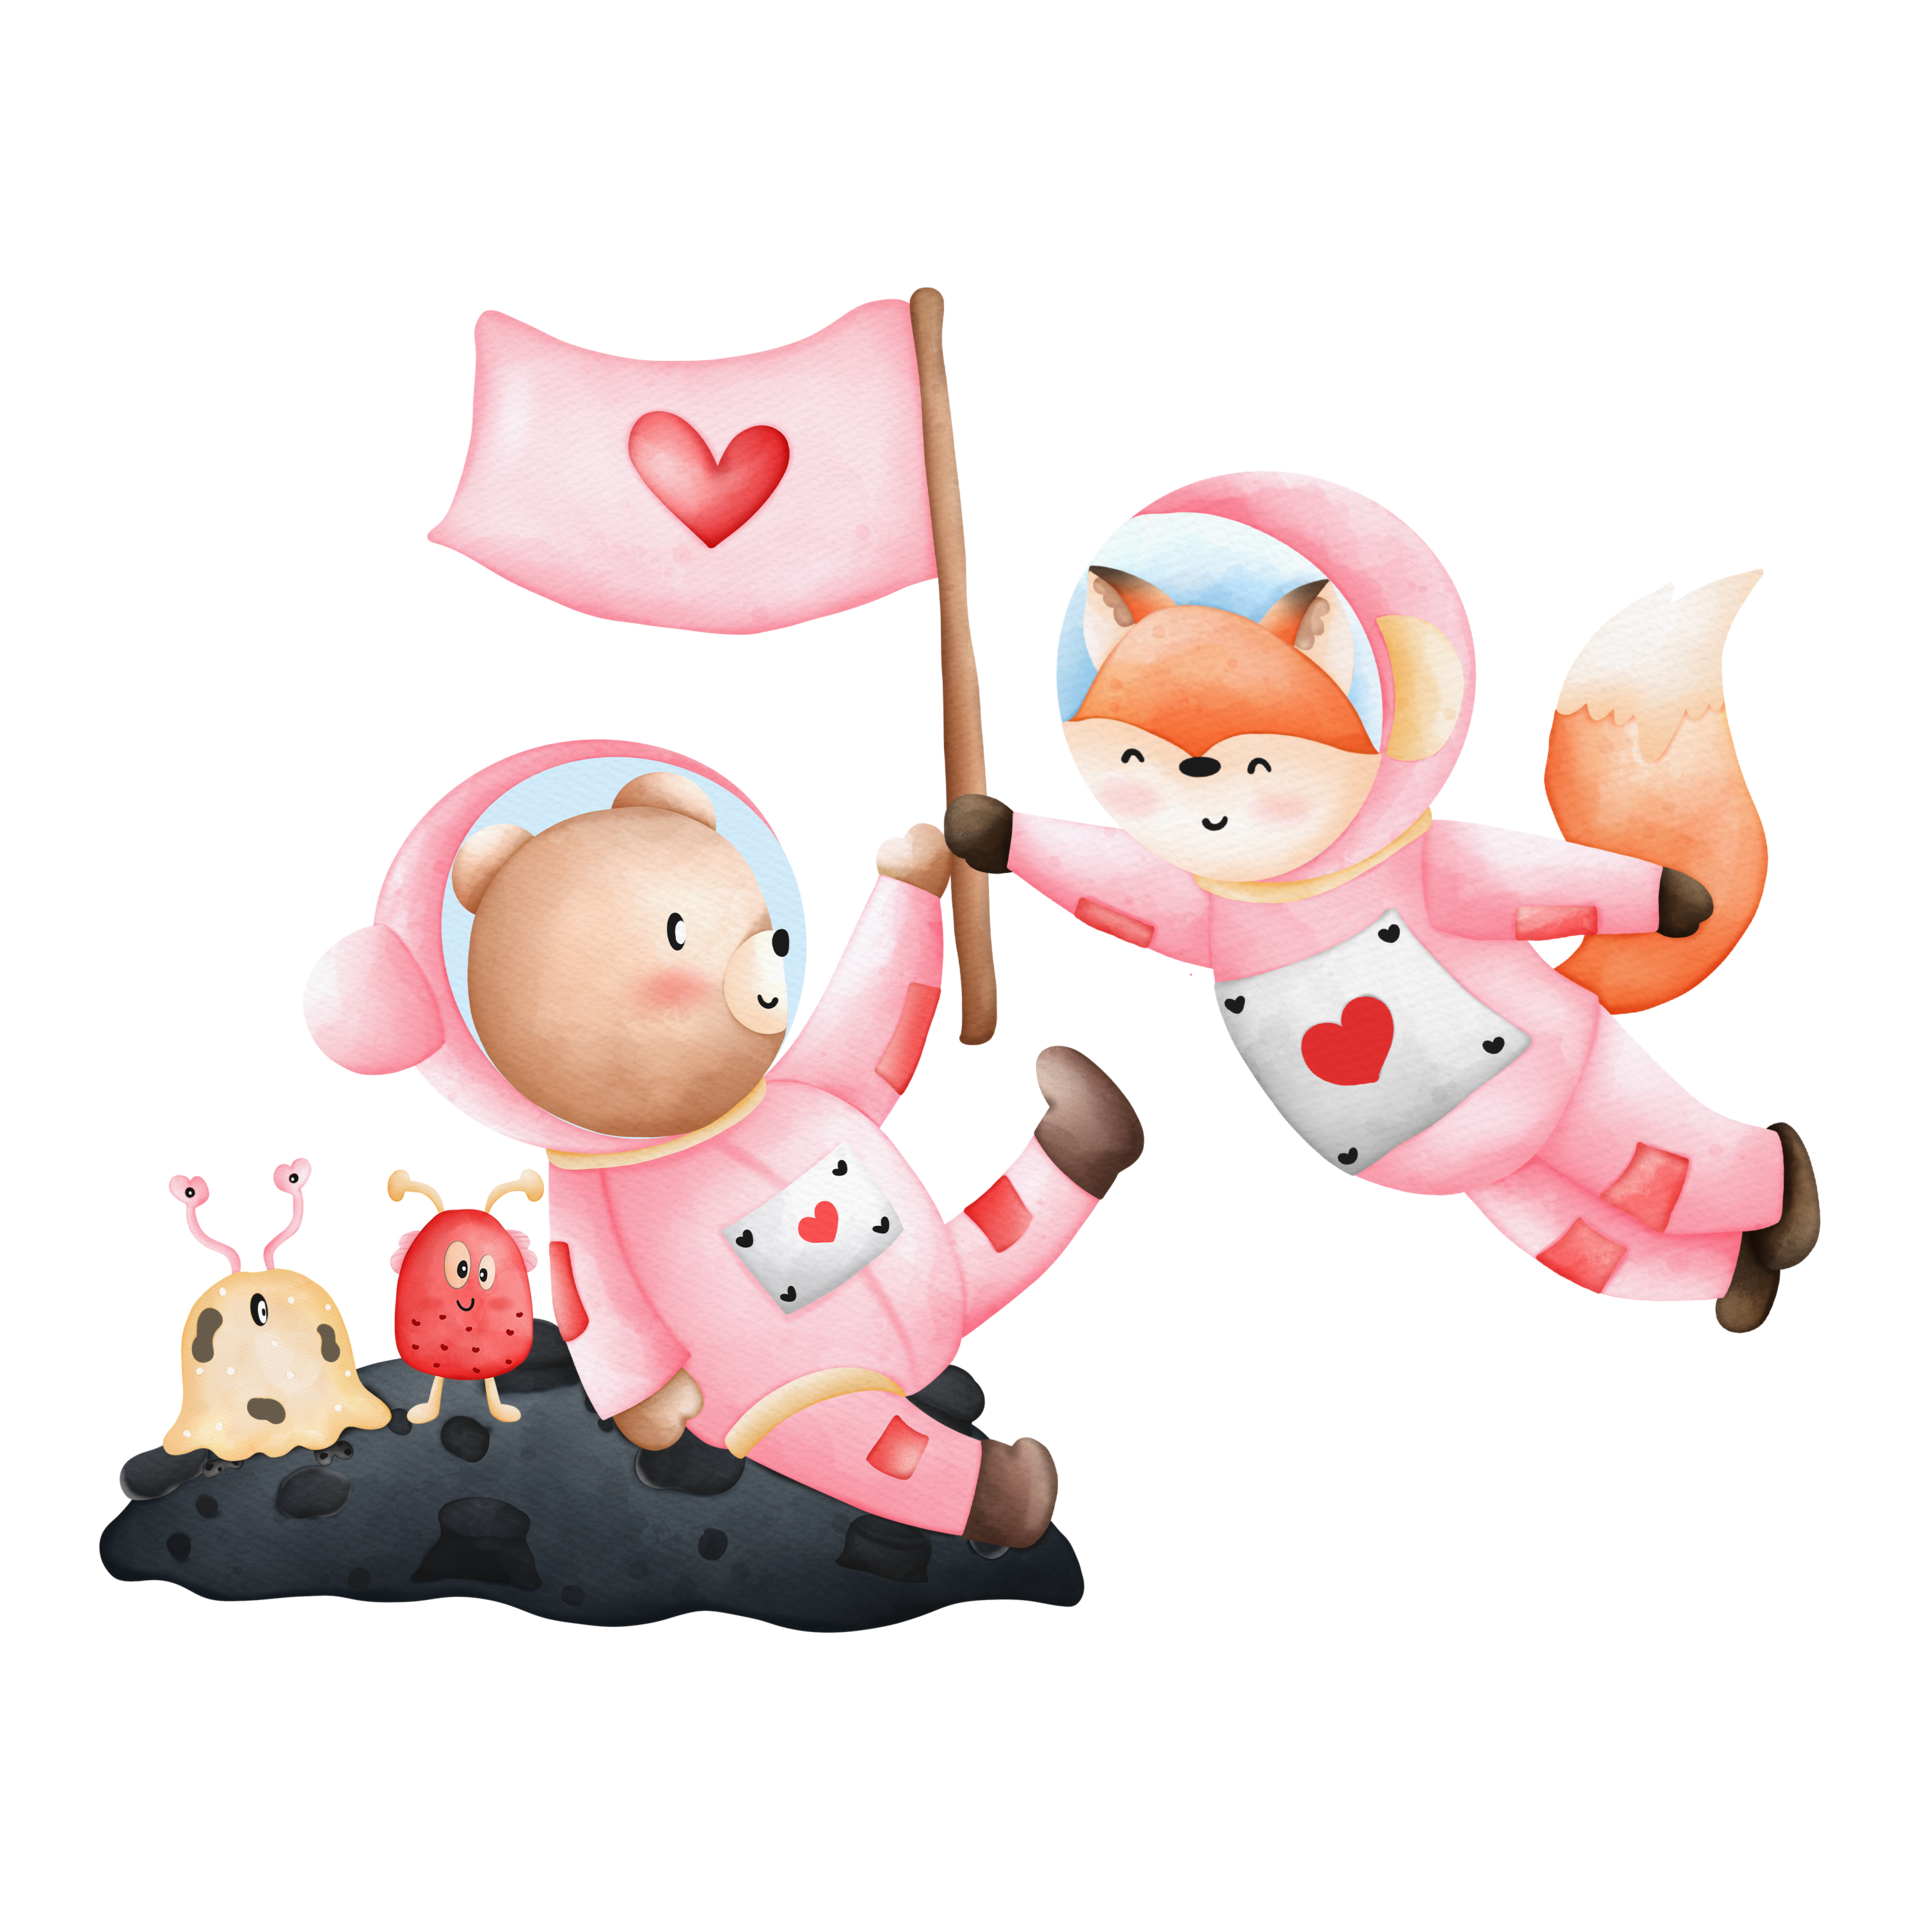 Free watercolor cute animals in an astronaut suit in space, children  illustration 17194421 PNG with Transparent Background